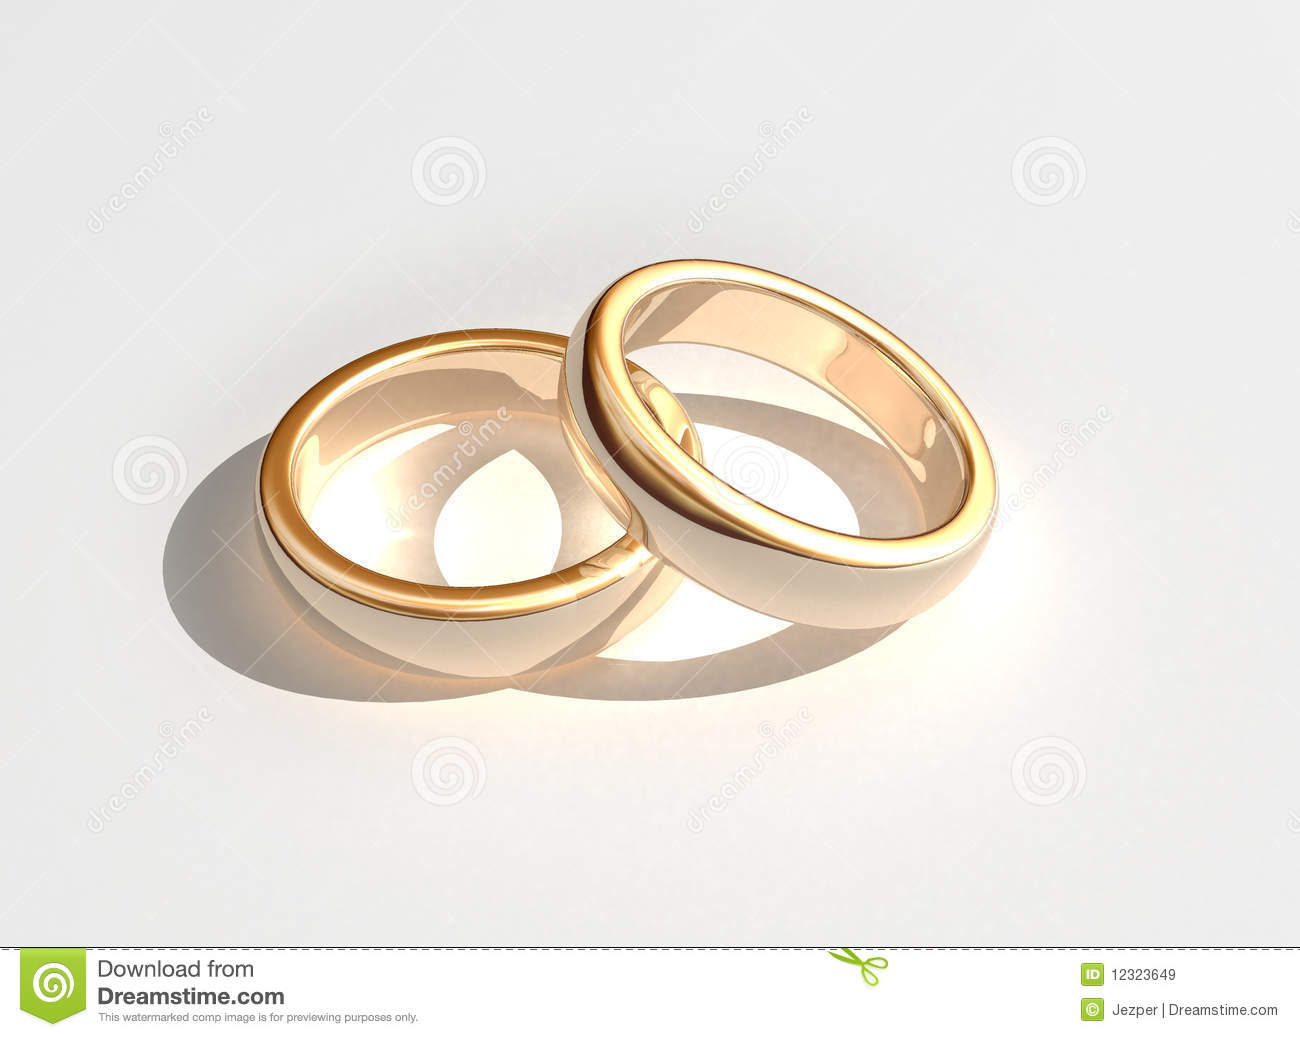 Wedding Rings No Royalty Images